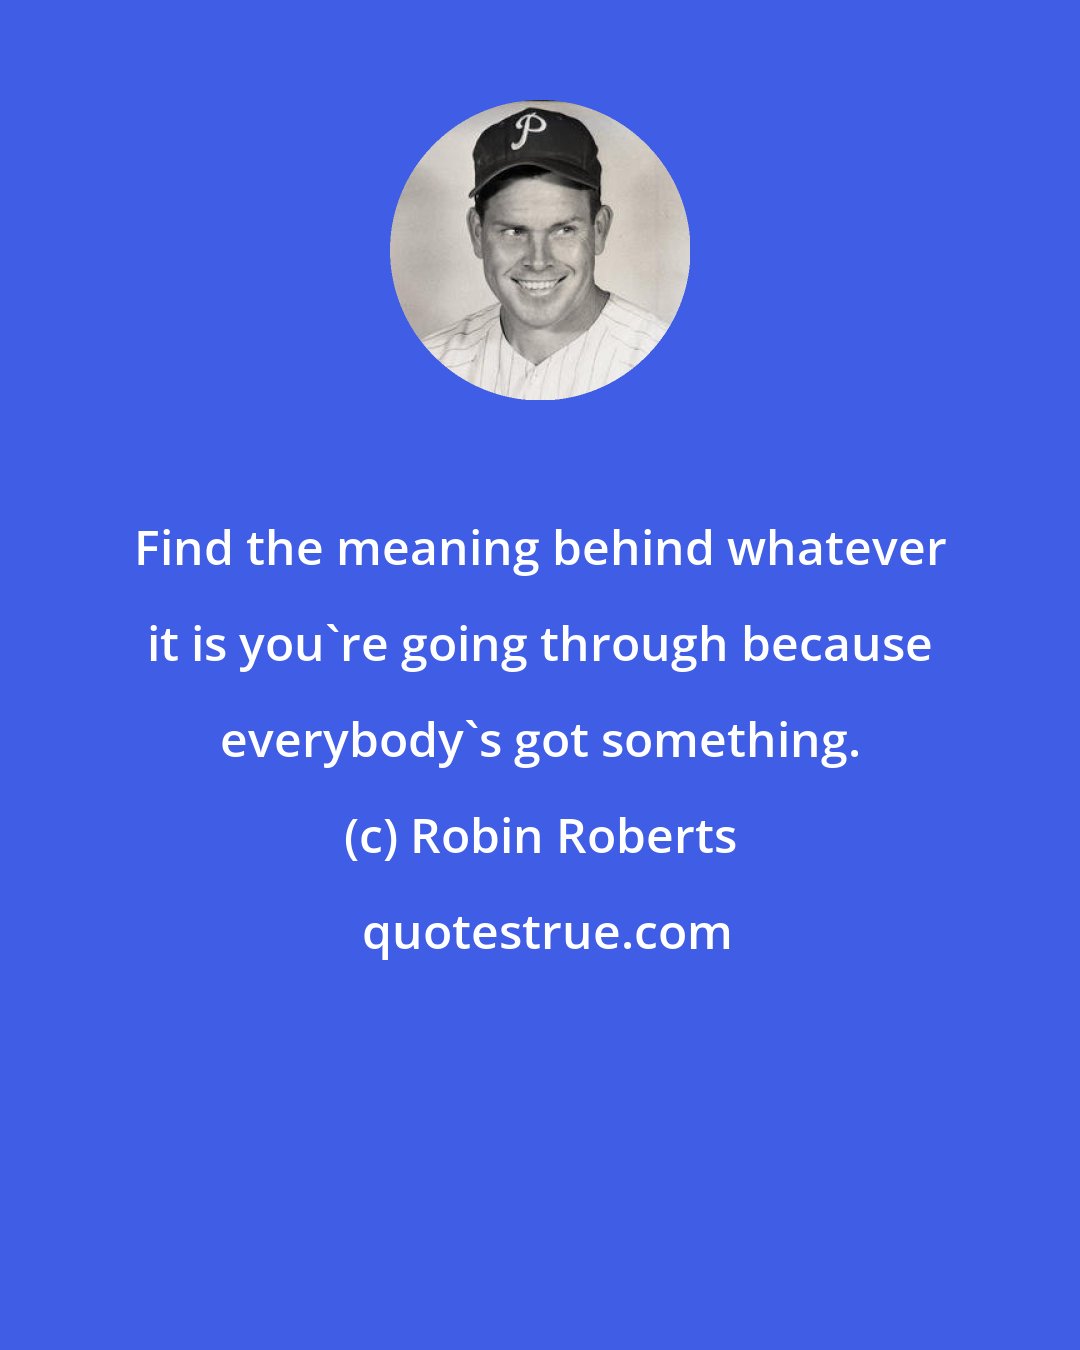 Robin Roberts: Find the meaning behind whatever it is you're going through because everybody's got something.